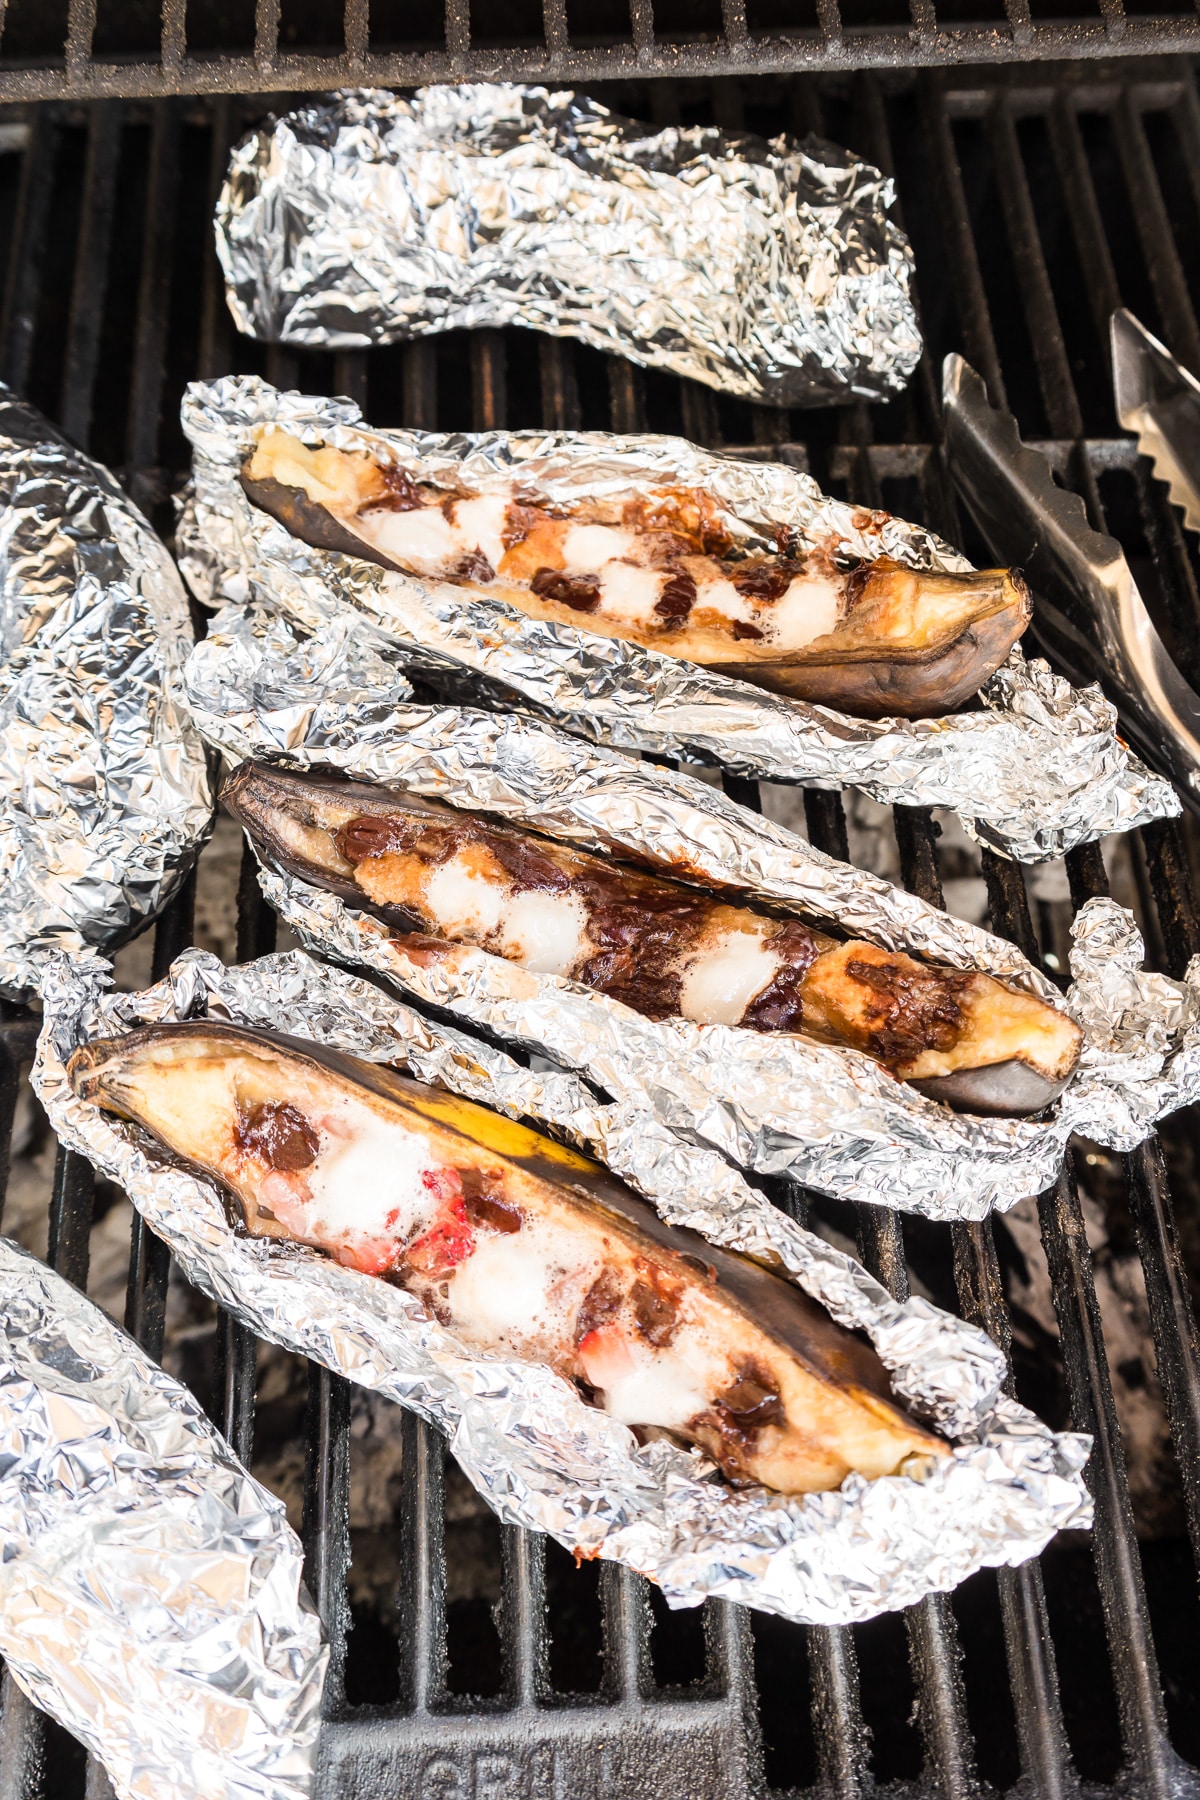 Bananas wrapped in foil and stuffed with chocolate, marshmallows and strawberries on a grill with some of them unwrapped to see the gooey inside.